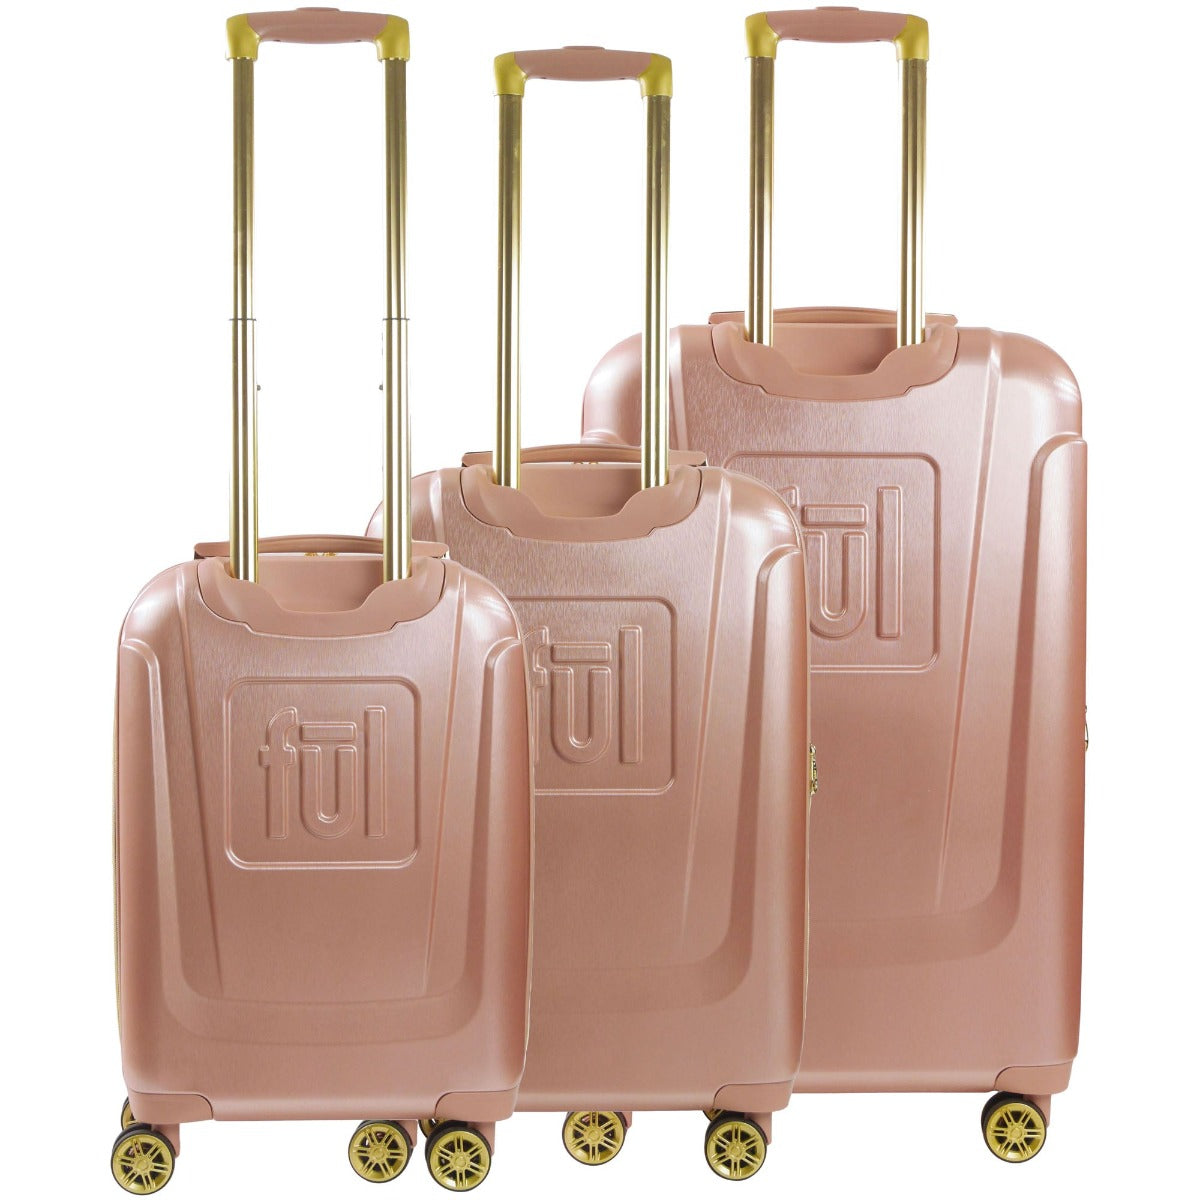 Set of Three Louis Vuitton Hard Sided Suitcases For Sale at